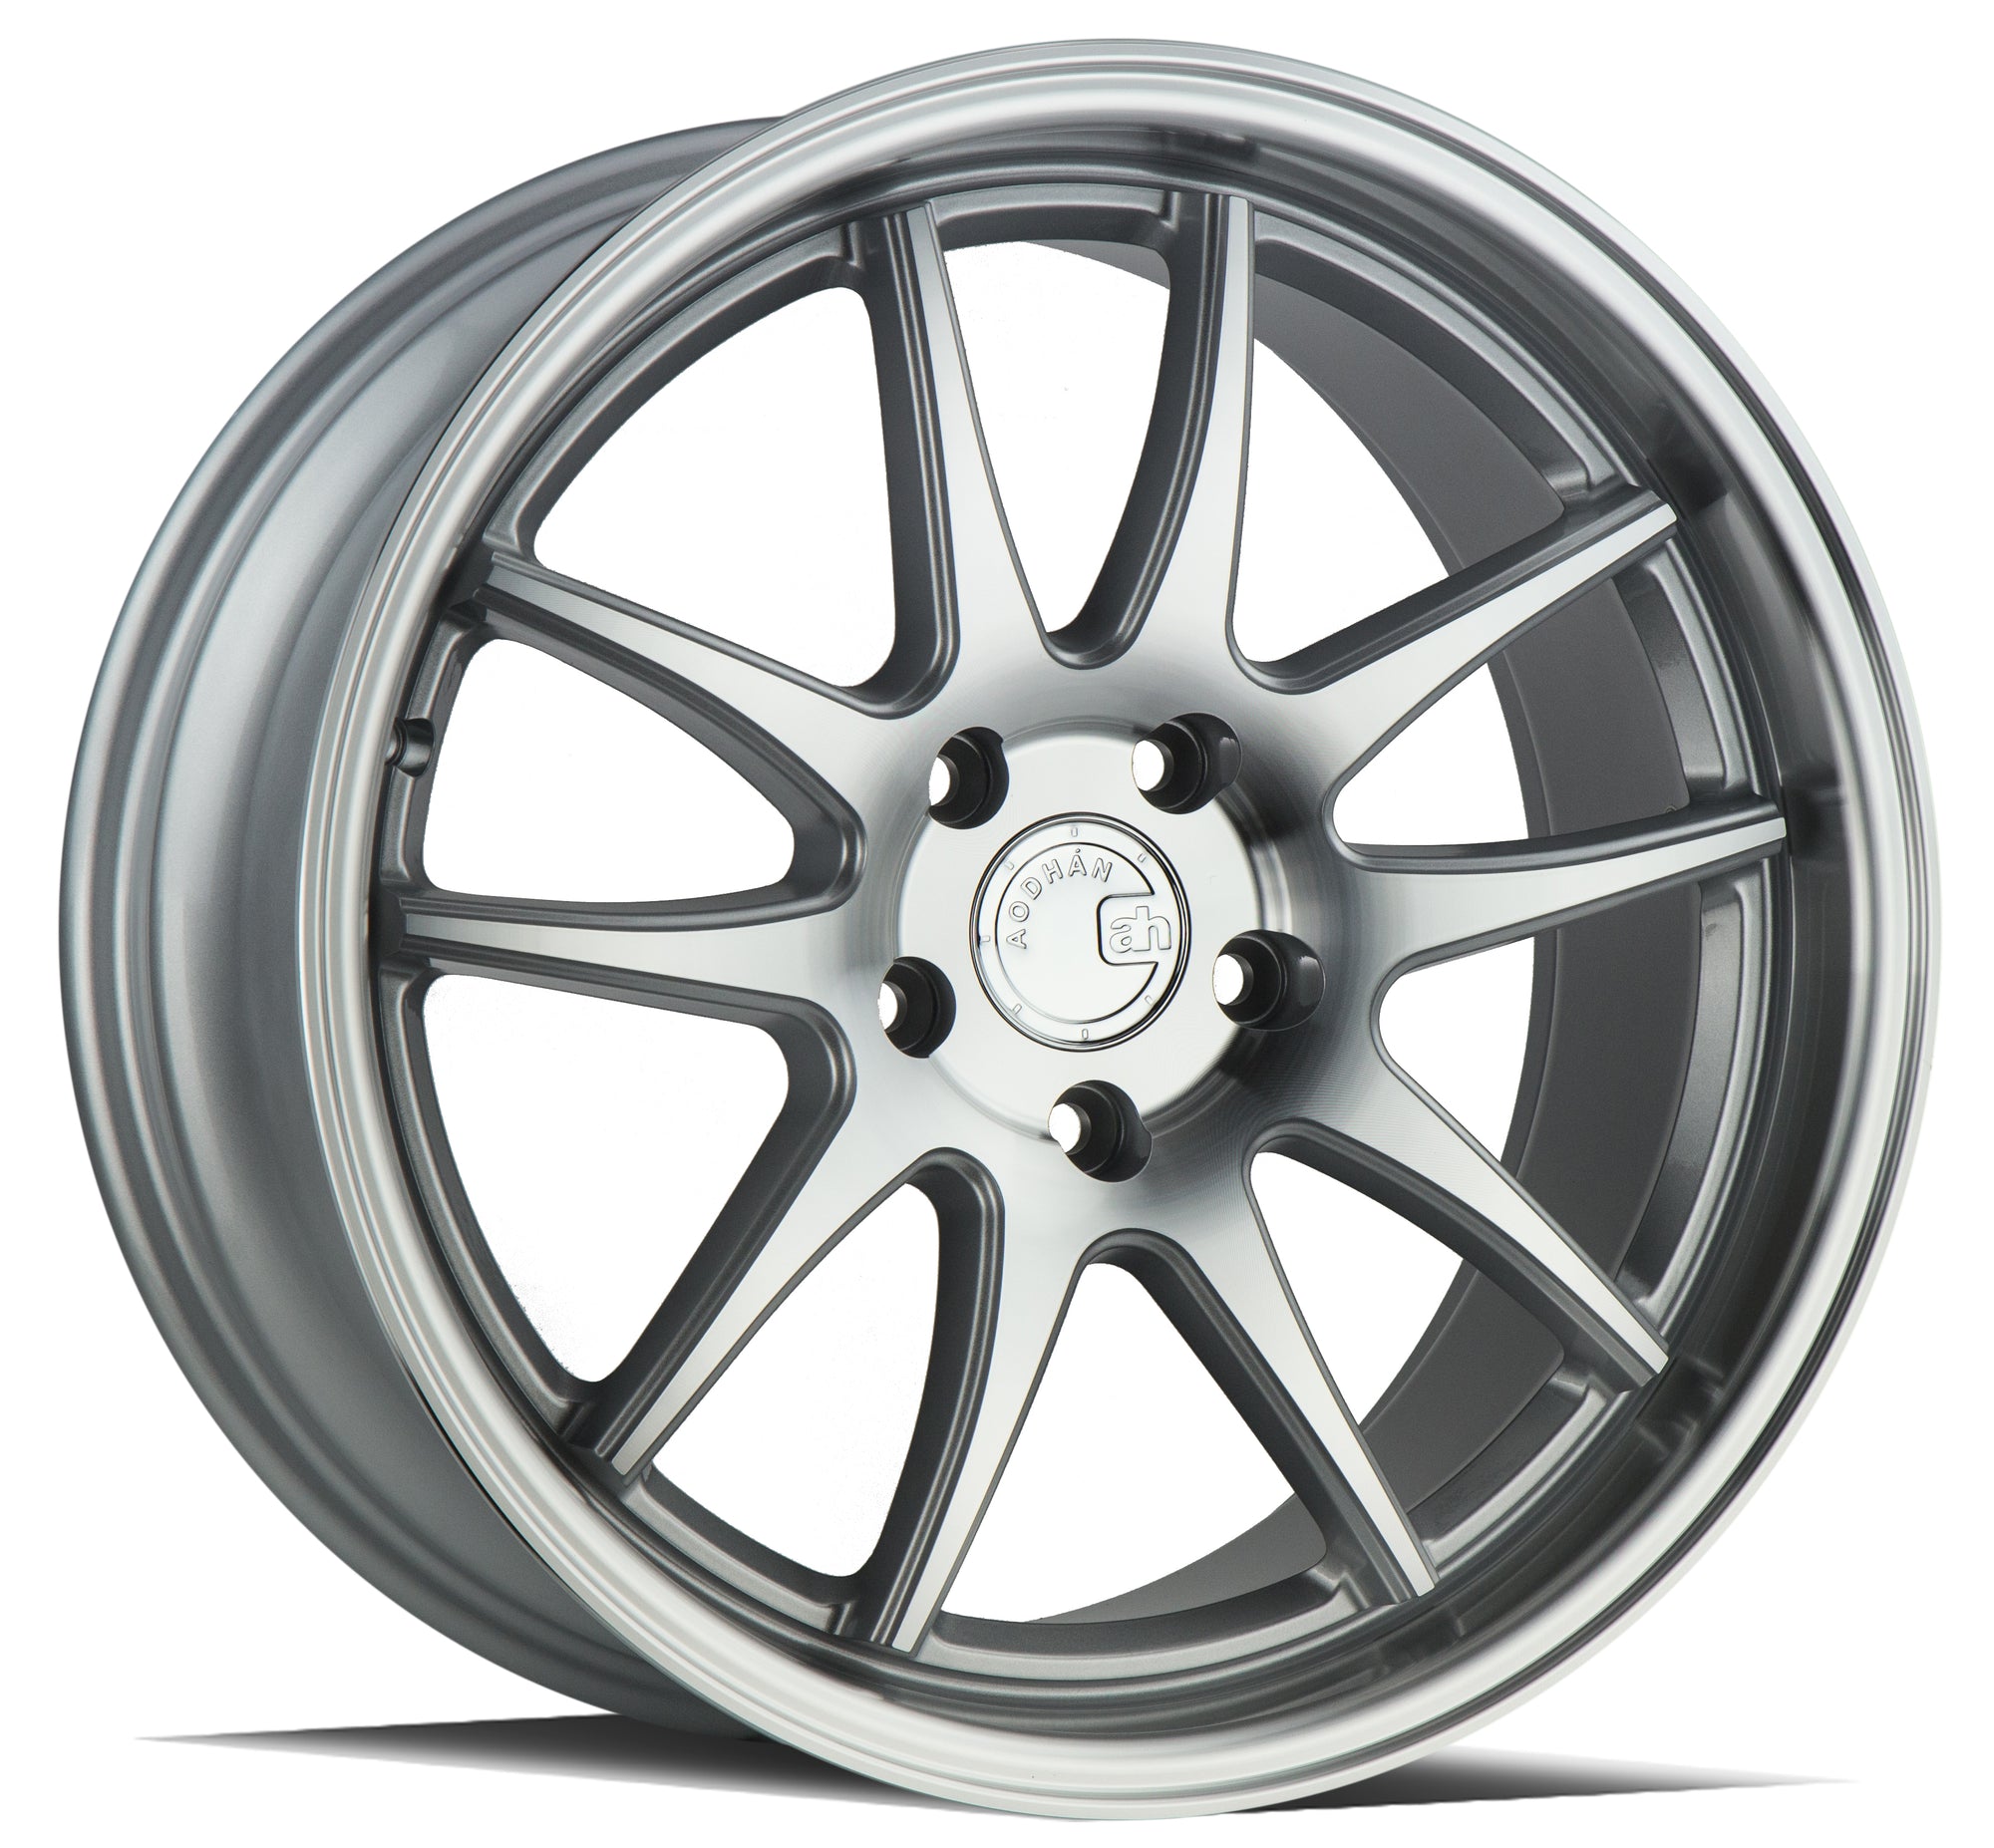 Aodhan DS02 18x8.5 5x114.3 +35 Silver w/Machined Face